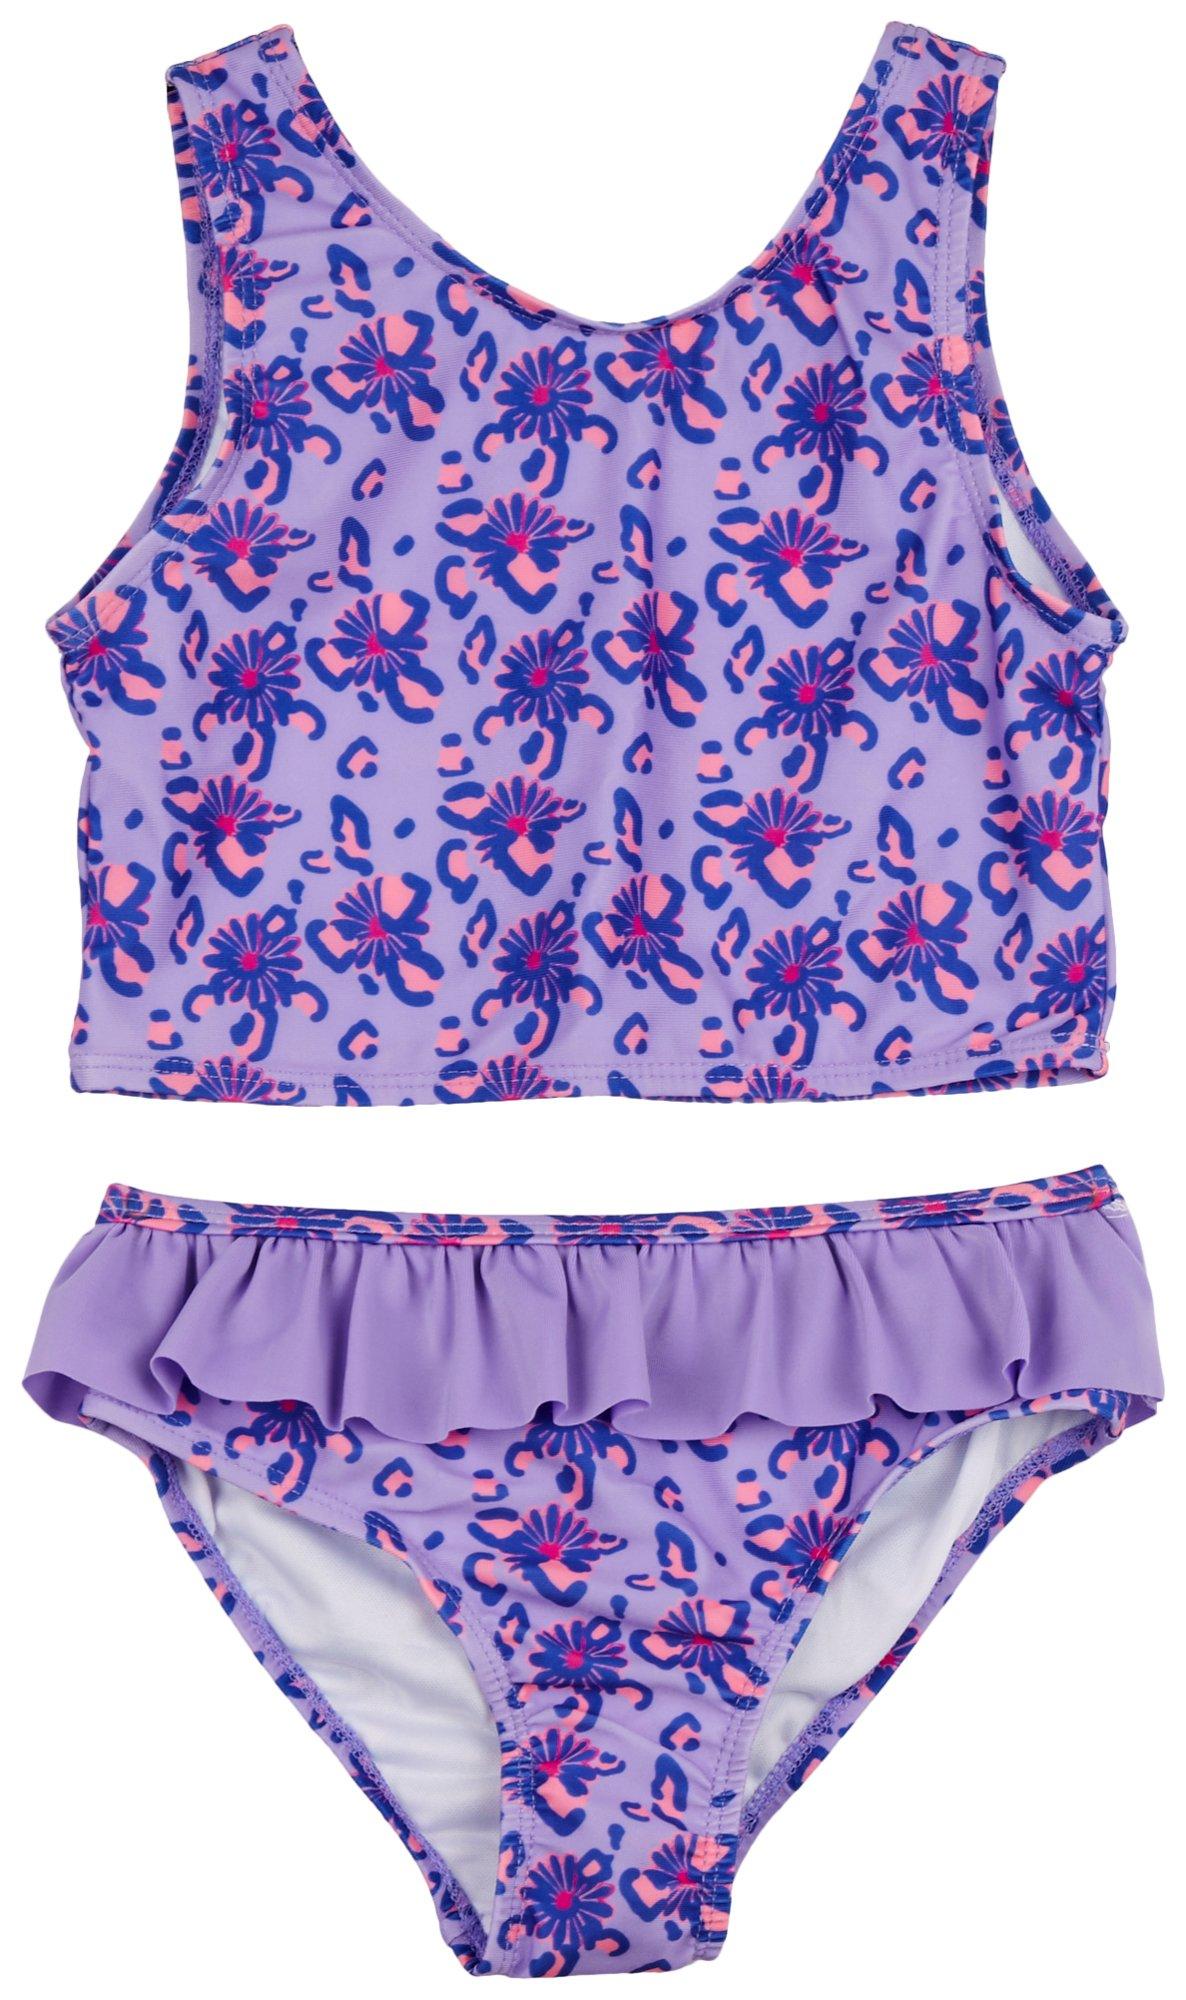 BRIGHT SKY Little Girls 2-Pc. Floral Cheetah Swimsuit